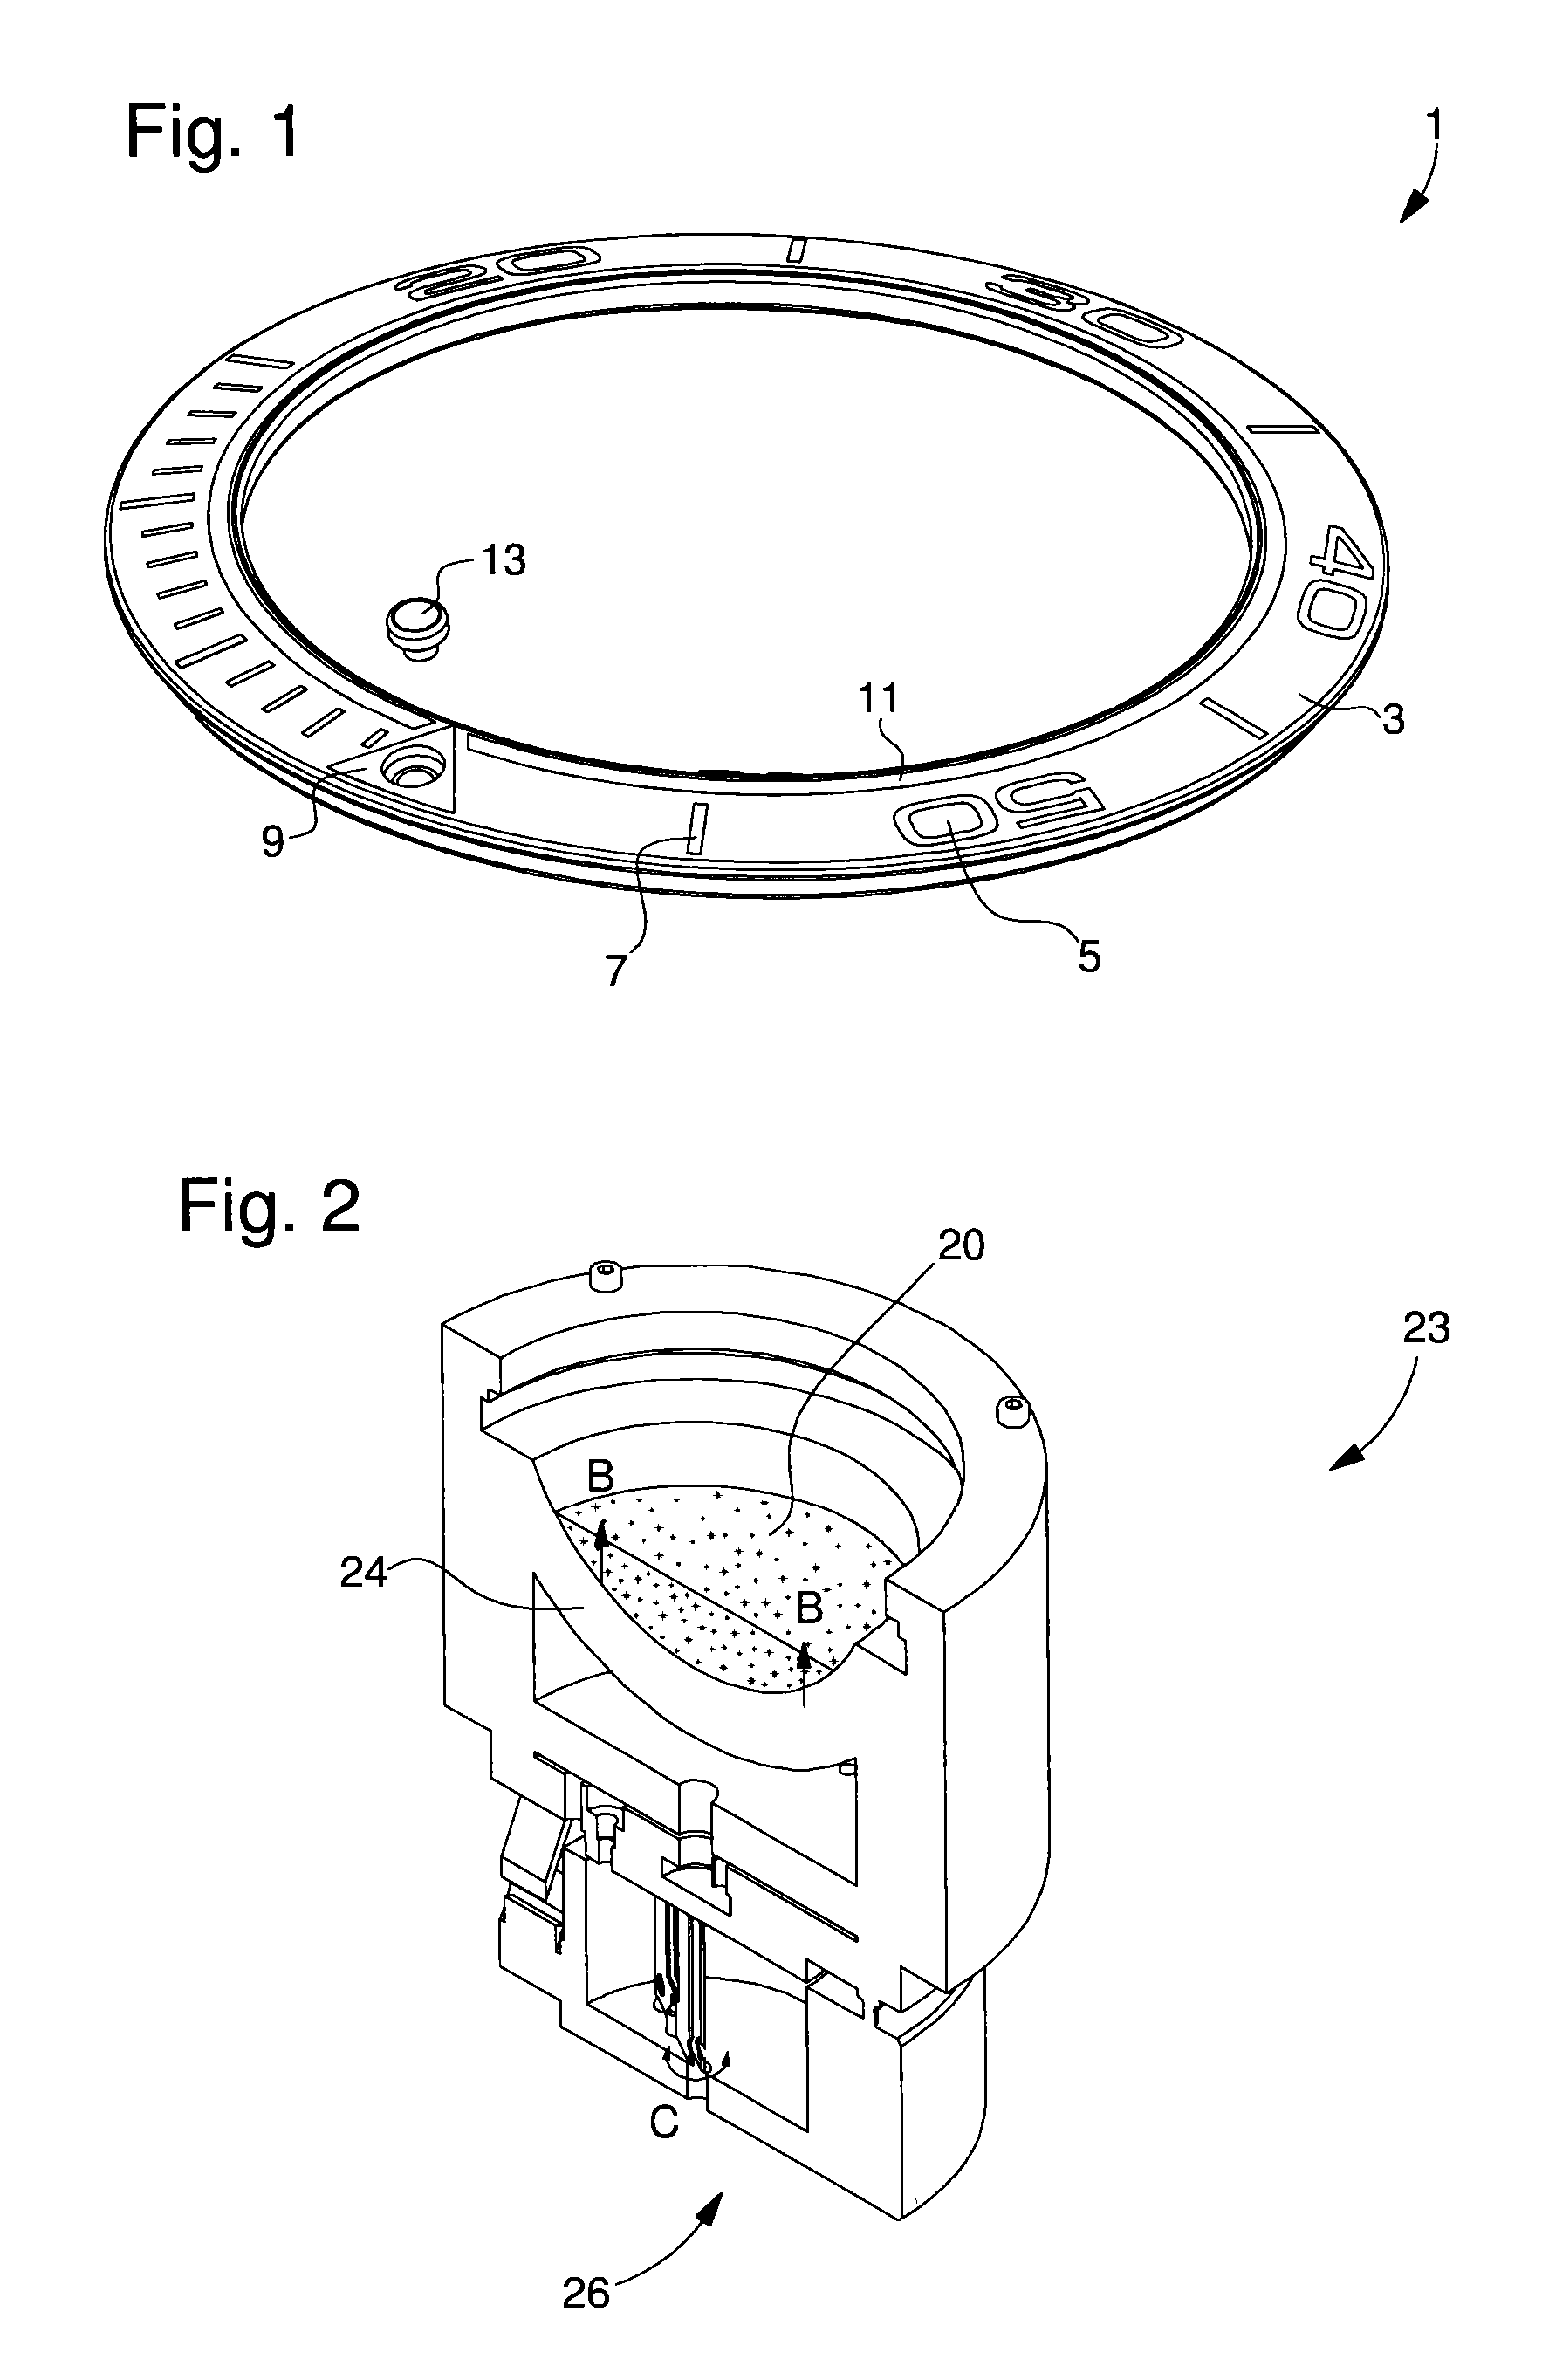 System of finishing a part formed of several materials